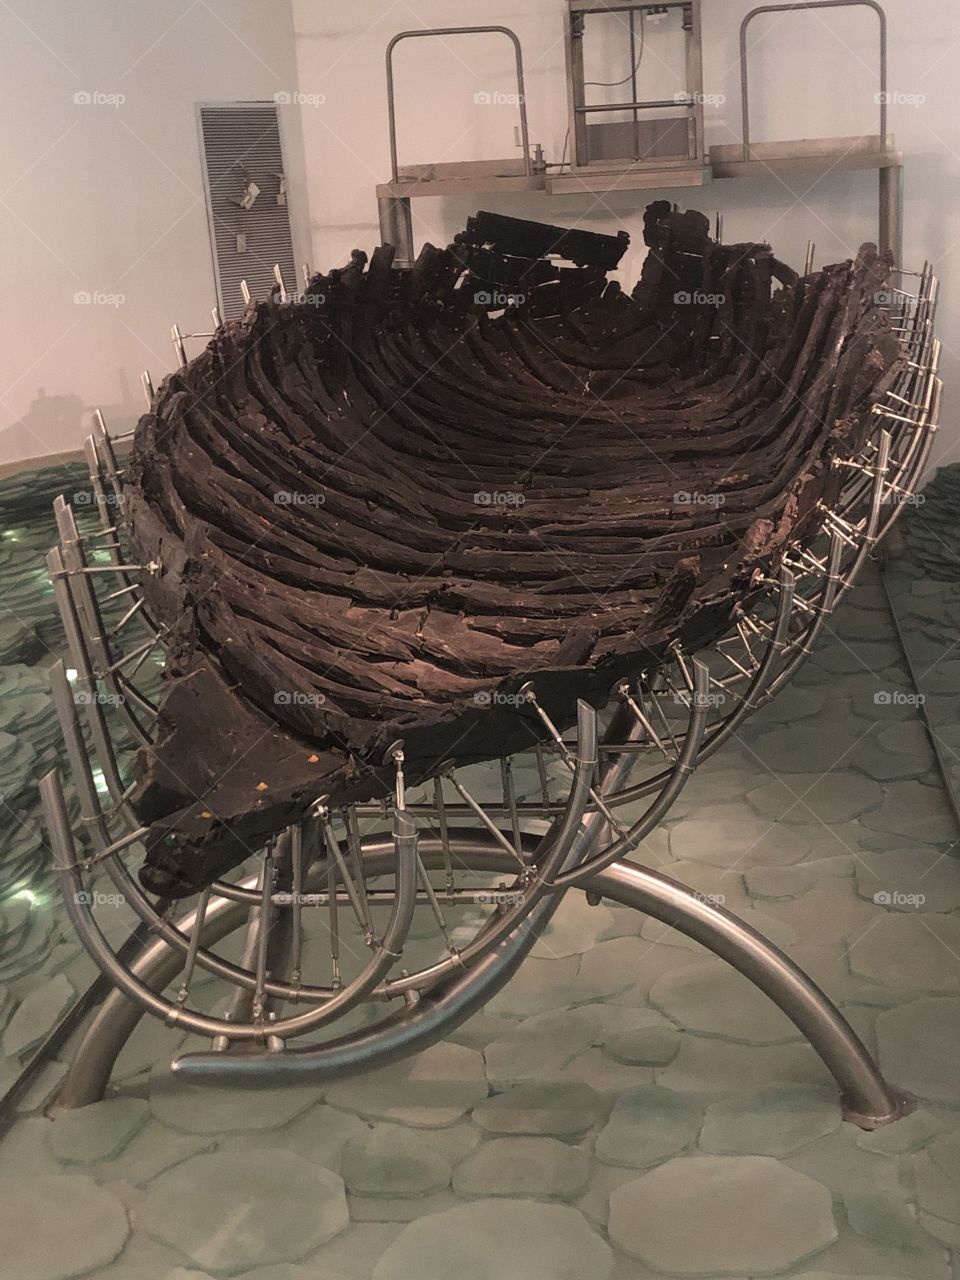 Boat from the days of Jesus in Israel 